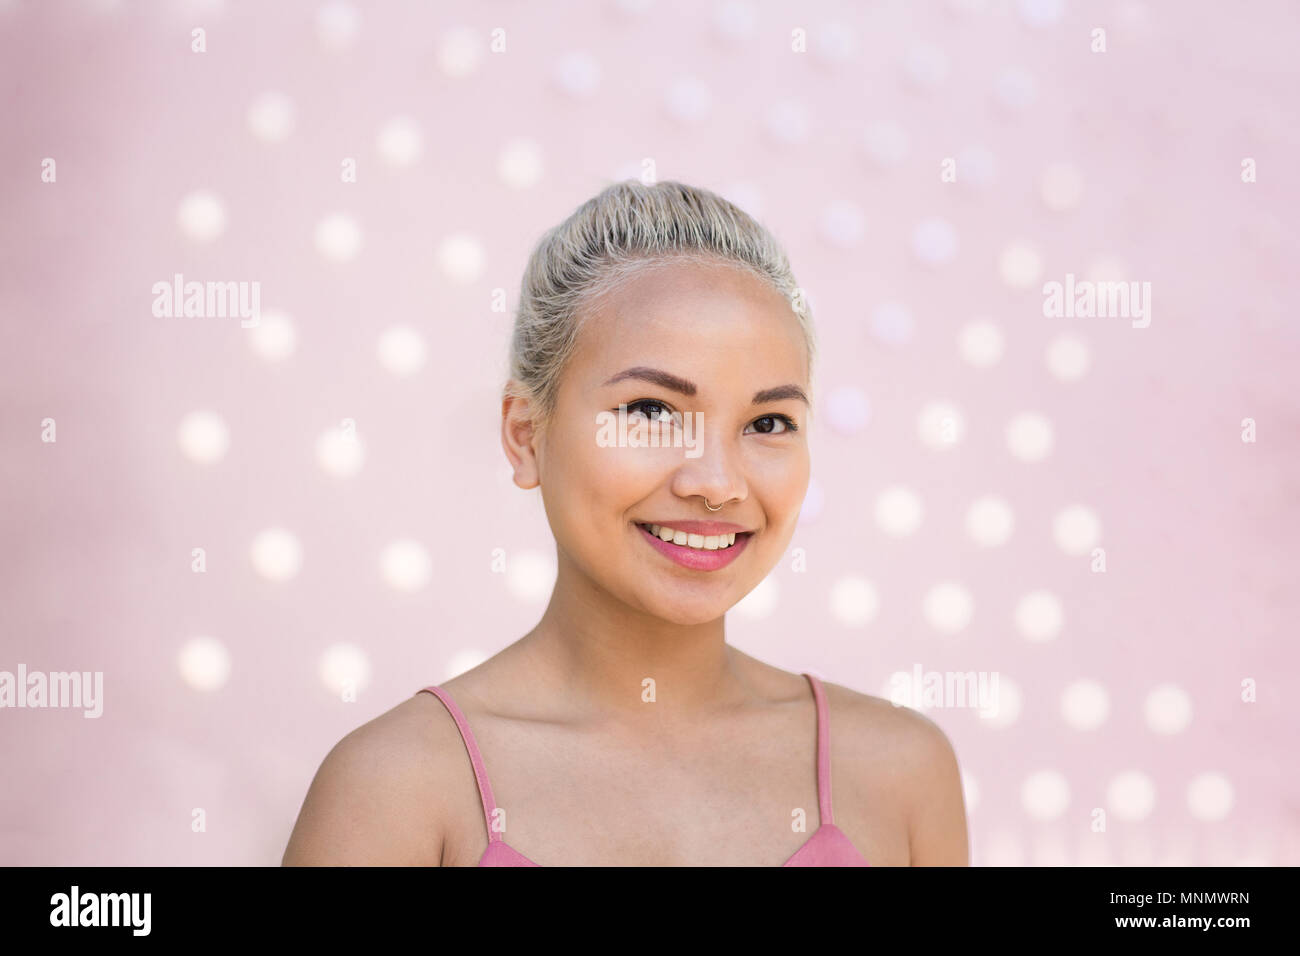 Young adult female with pink background Stock Photo